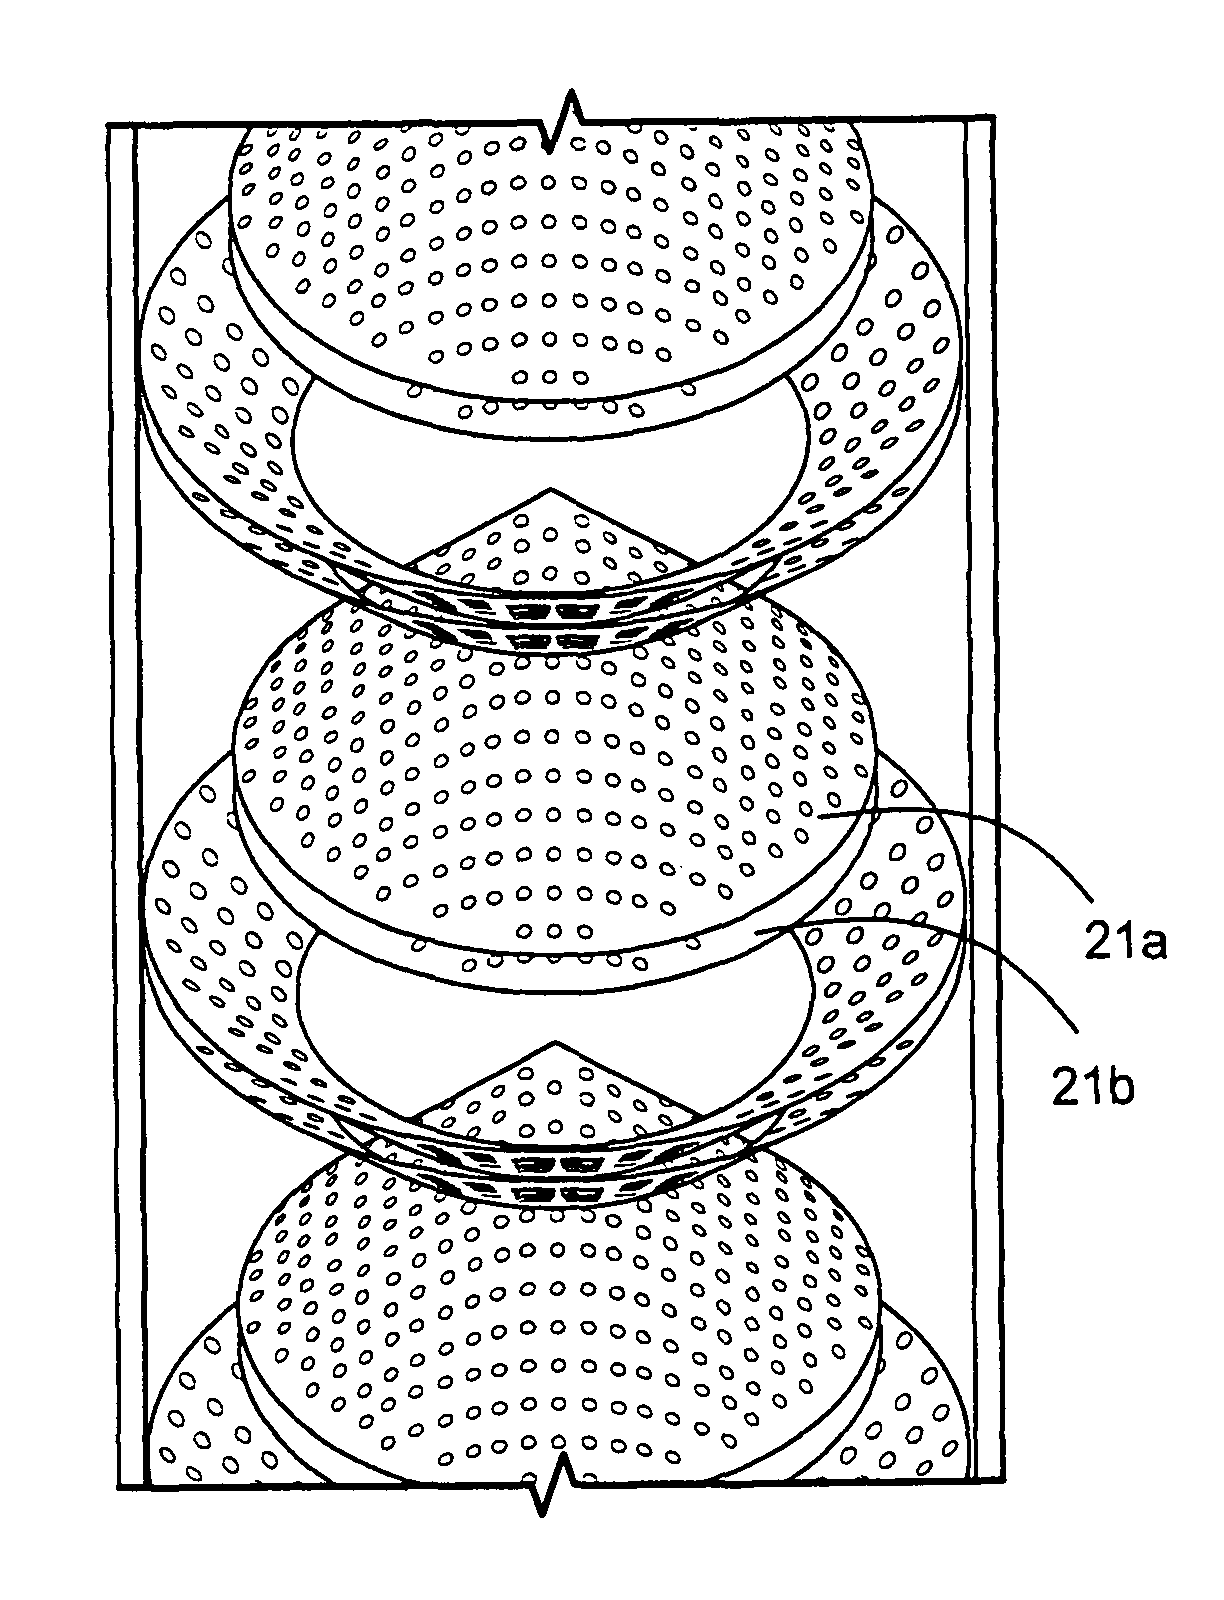 Stripping apparatus for the gas-solid separation in a fluidized bed